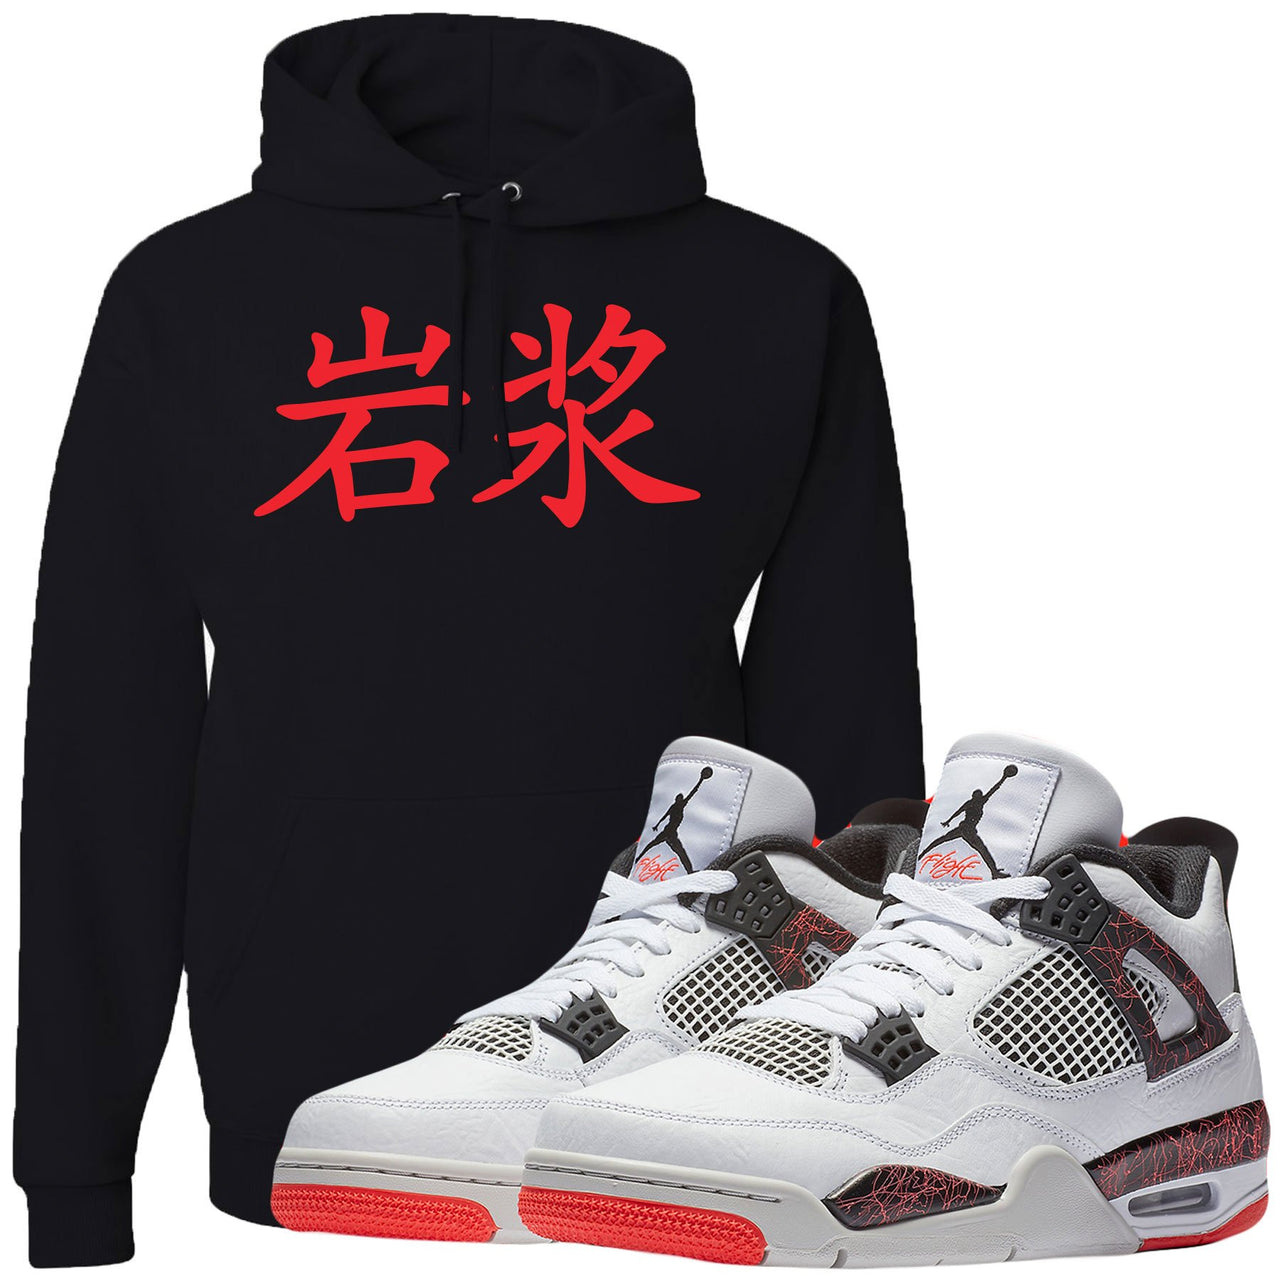 Match your pair of Jordan 4 Pale Citron "Hot Lava 4s" sneakers with this sneaker matching hoodie